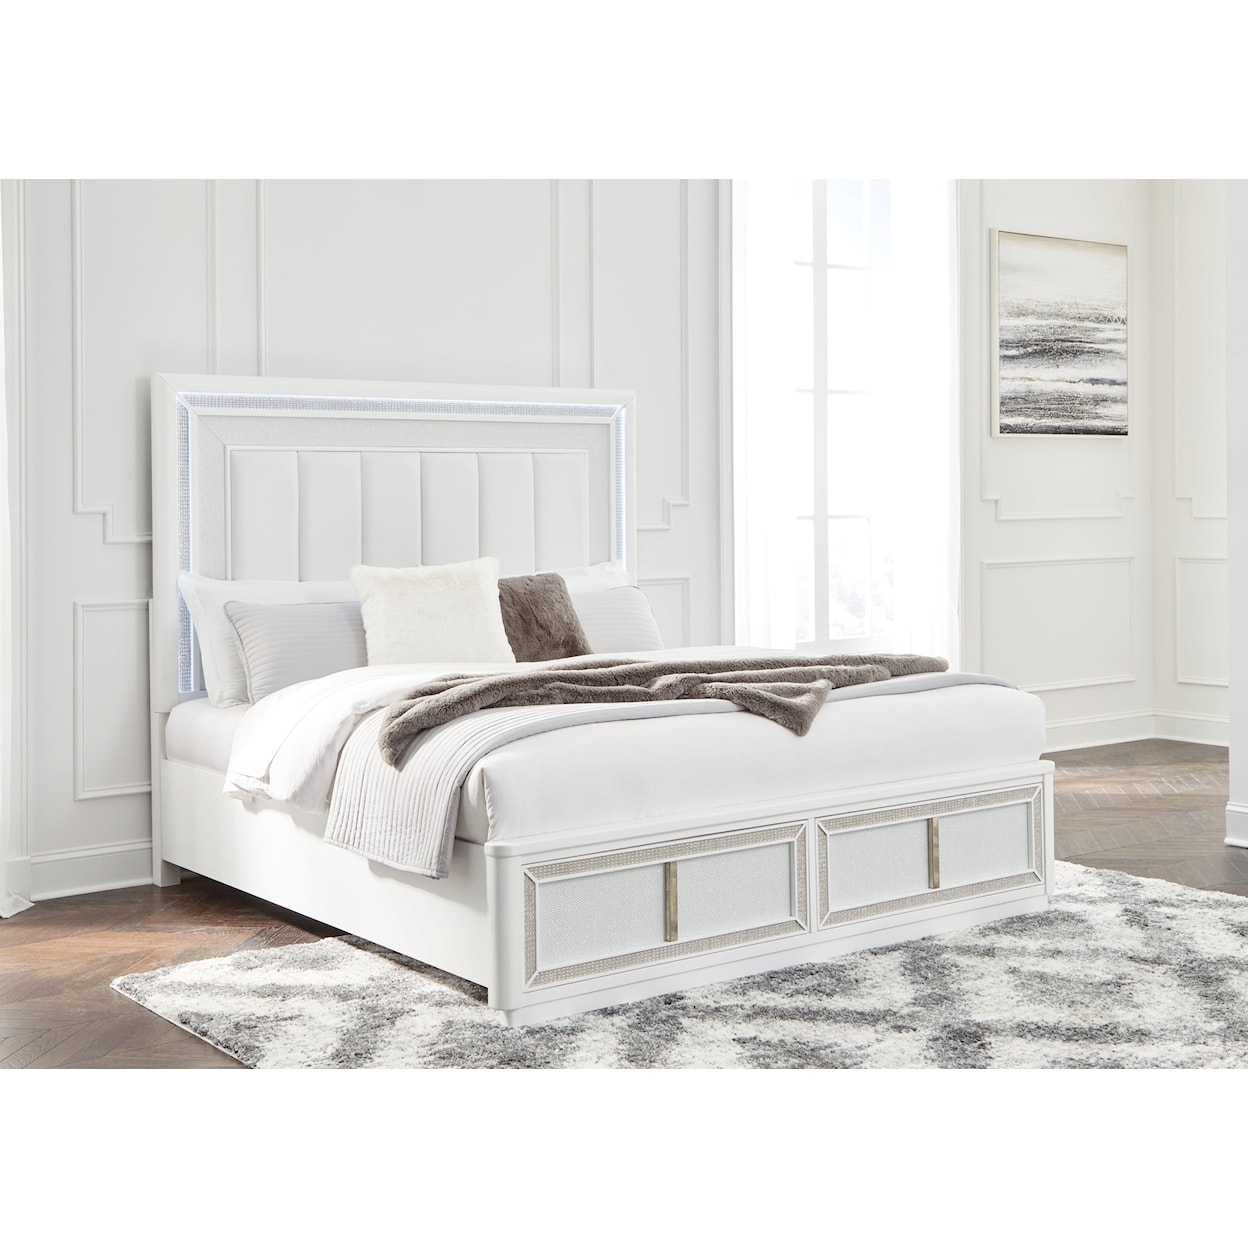 Signature Design by Ashley Chalanna California King Upholstered Storage Bed